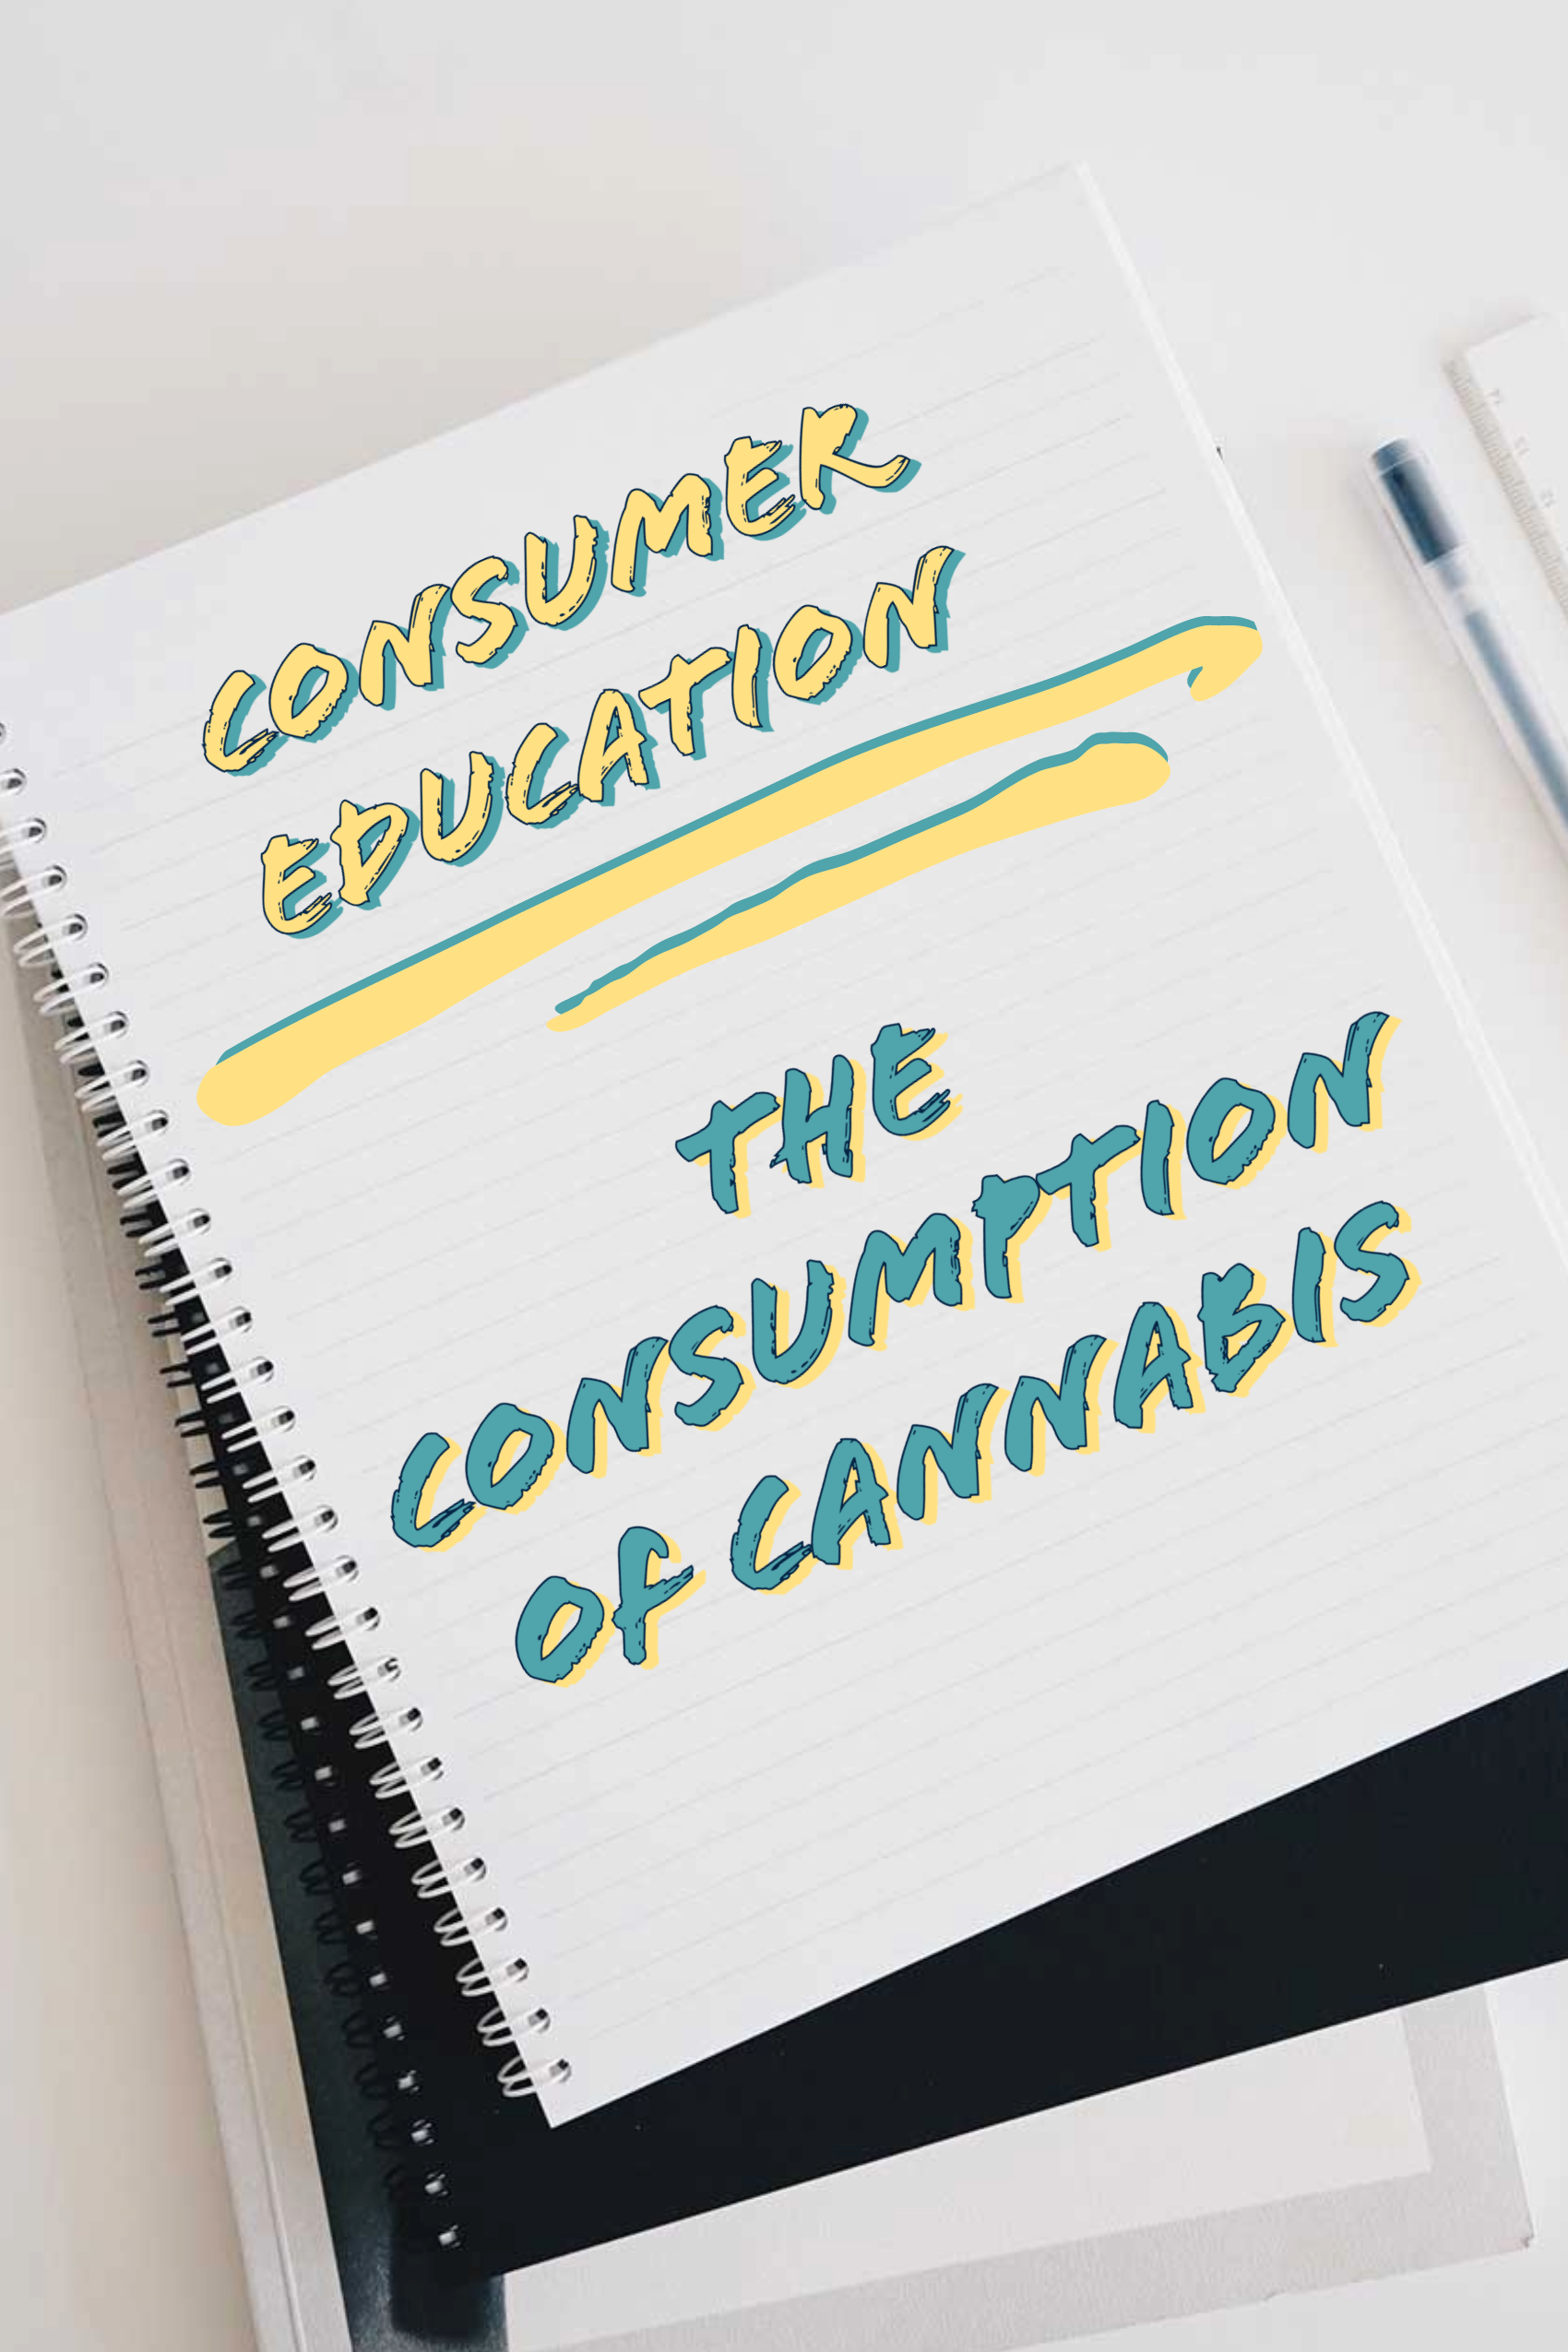 Consumption of Cannabis Course